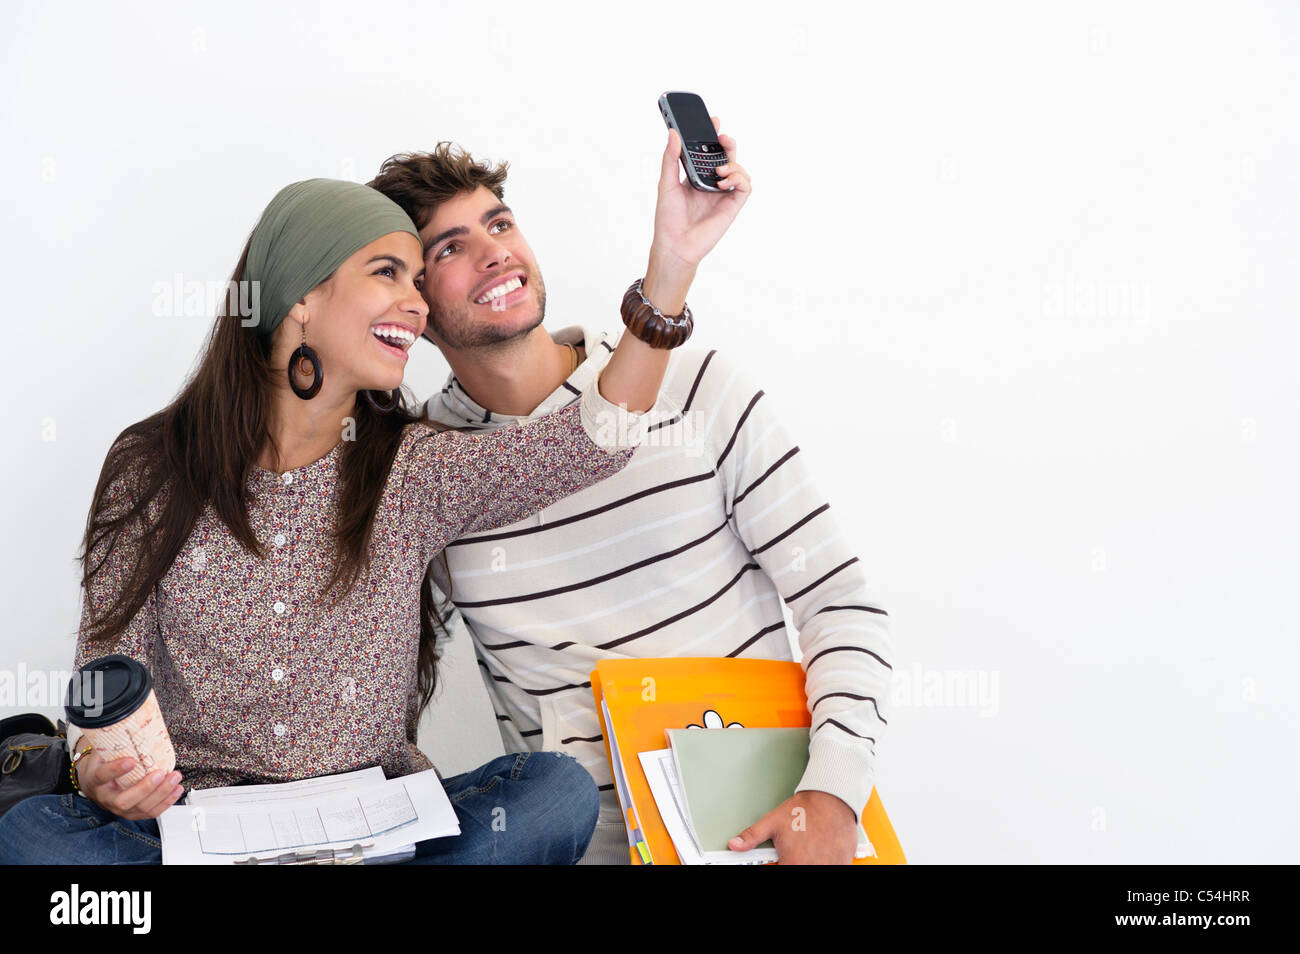 Two young friends taking photos of themselves against white background Stock Photo